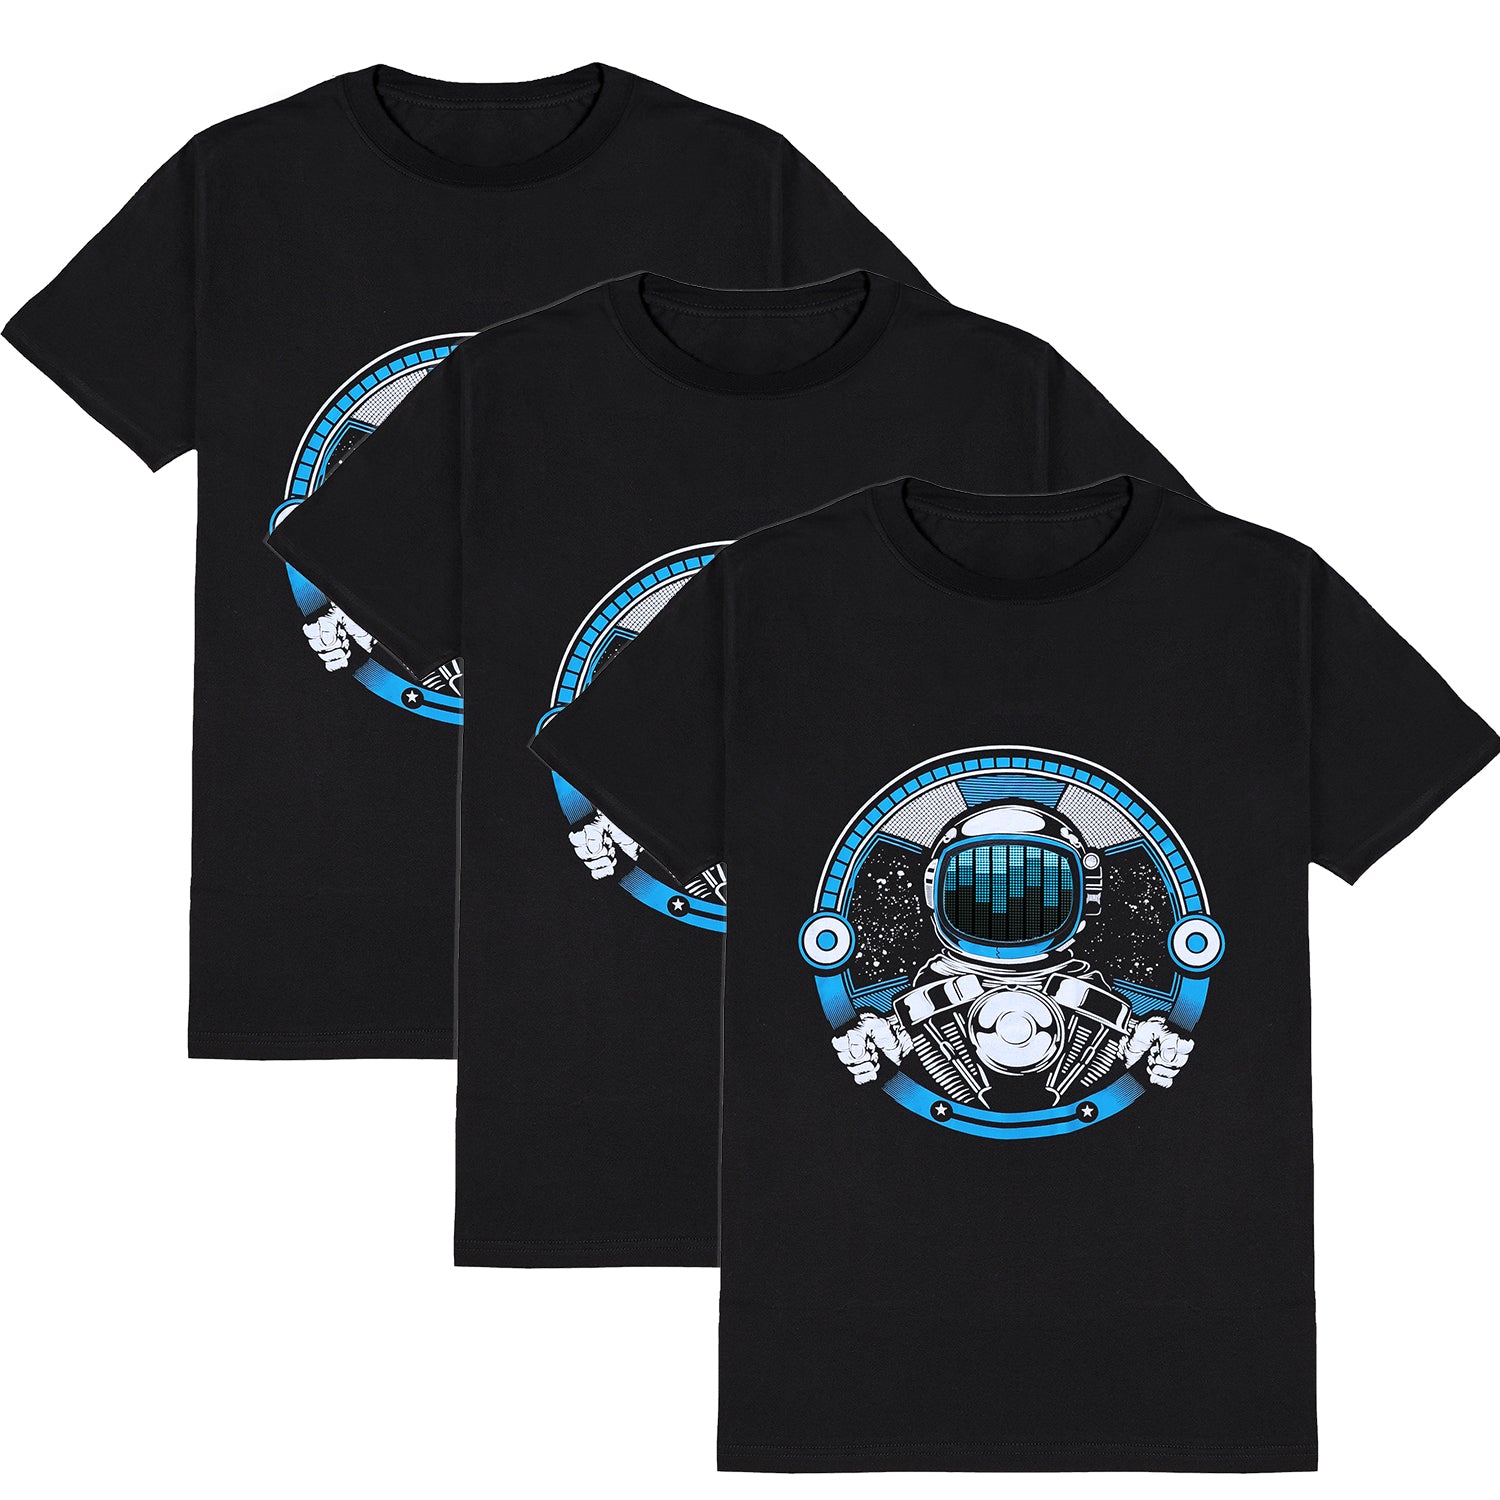 LED T Shirt Sound Activated Glow Shirts Light up Equalizer Clothes for Party(Astronaut)